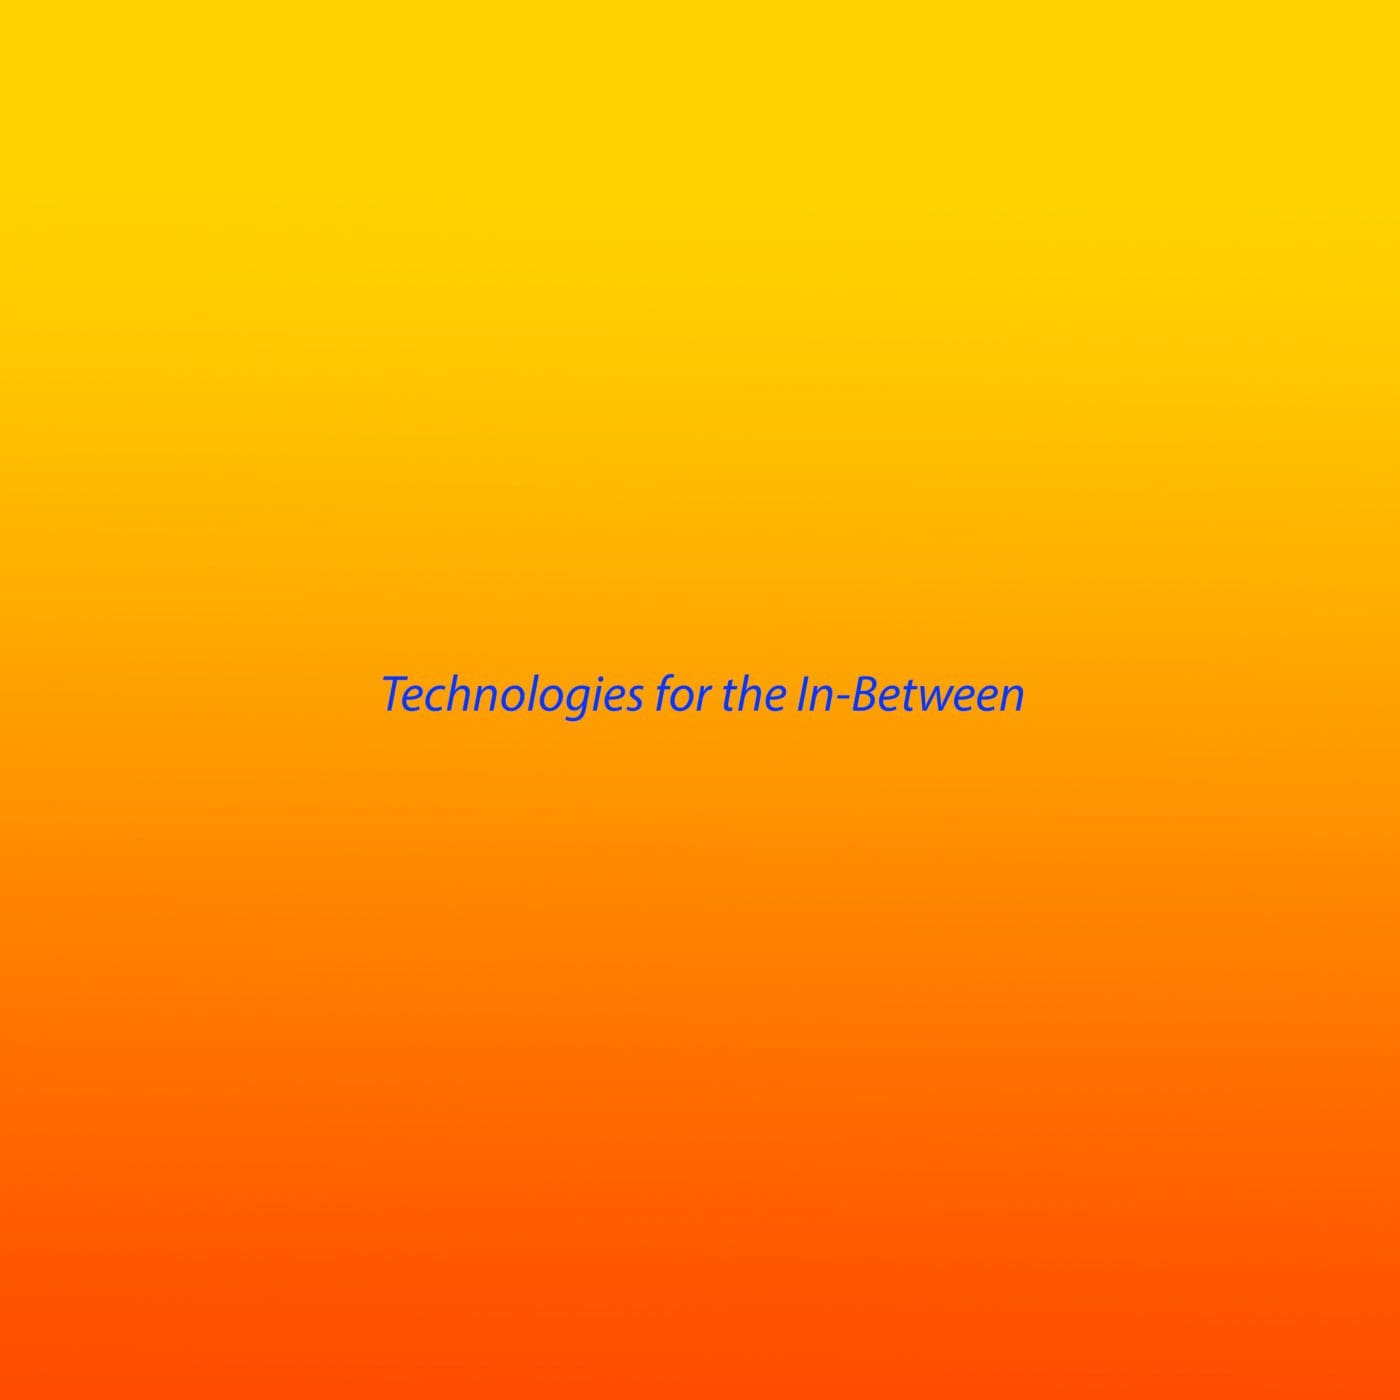 Bright blue text appears on a background that is a gradient from yellow, through orange to red. The text reads: Technologies for the In-Between